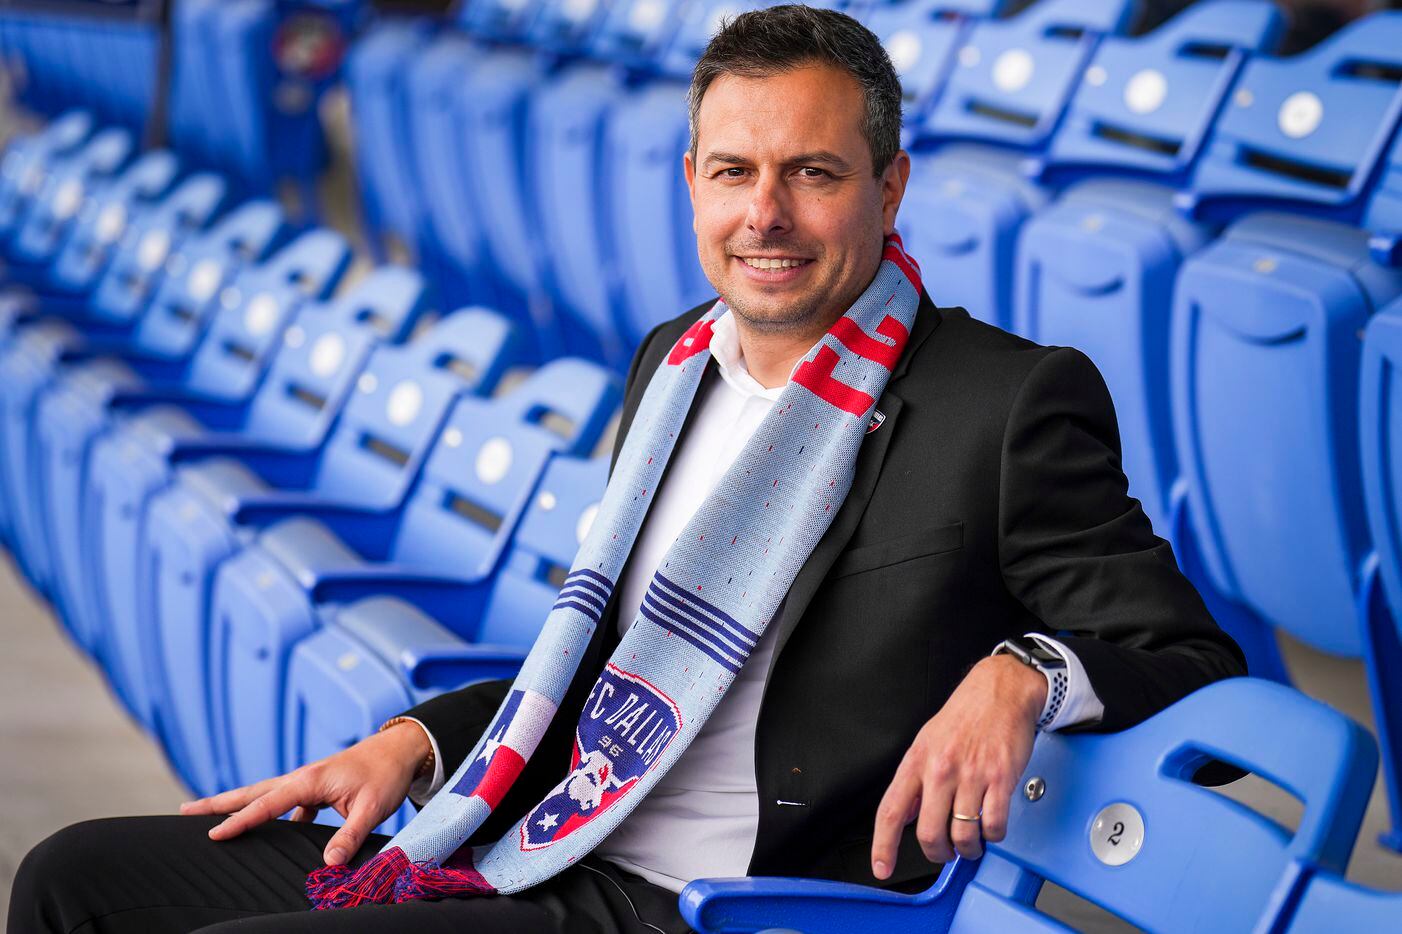 New FC Dallas head coach Nico Estévez poses for a portrait following his introductory press conference at the National Soccer Hall of Fame on Friday, Dec. 3, 2021, in Frisco, Texas.